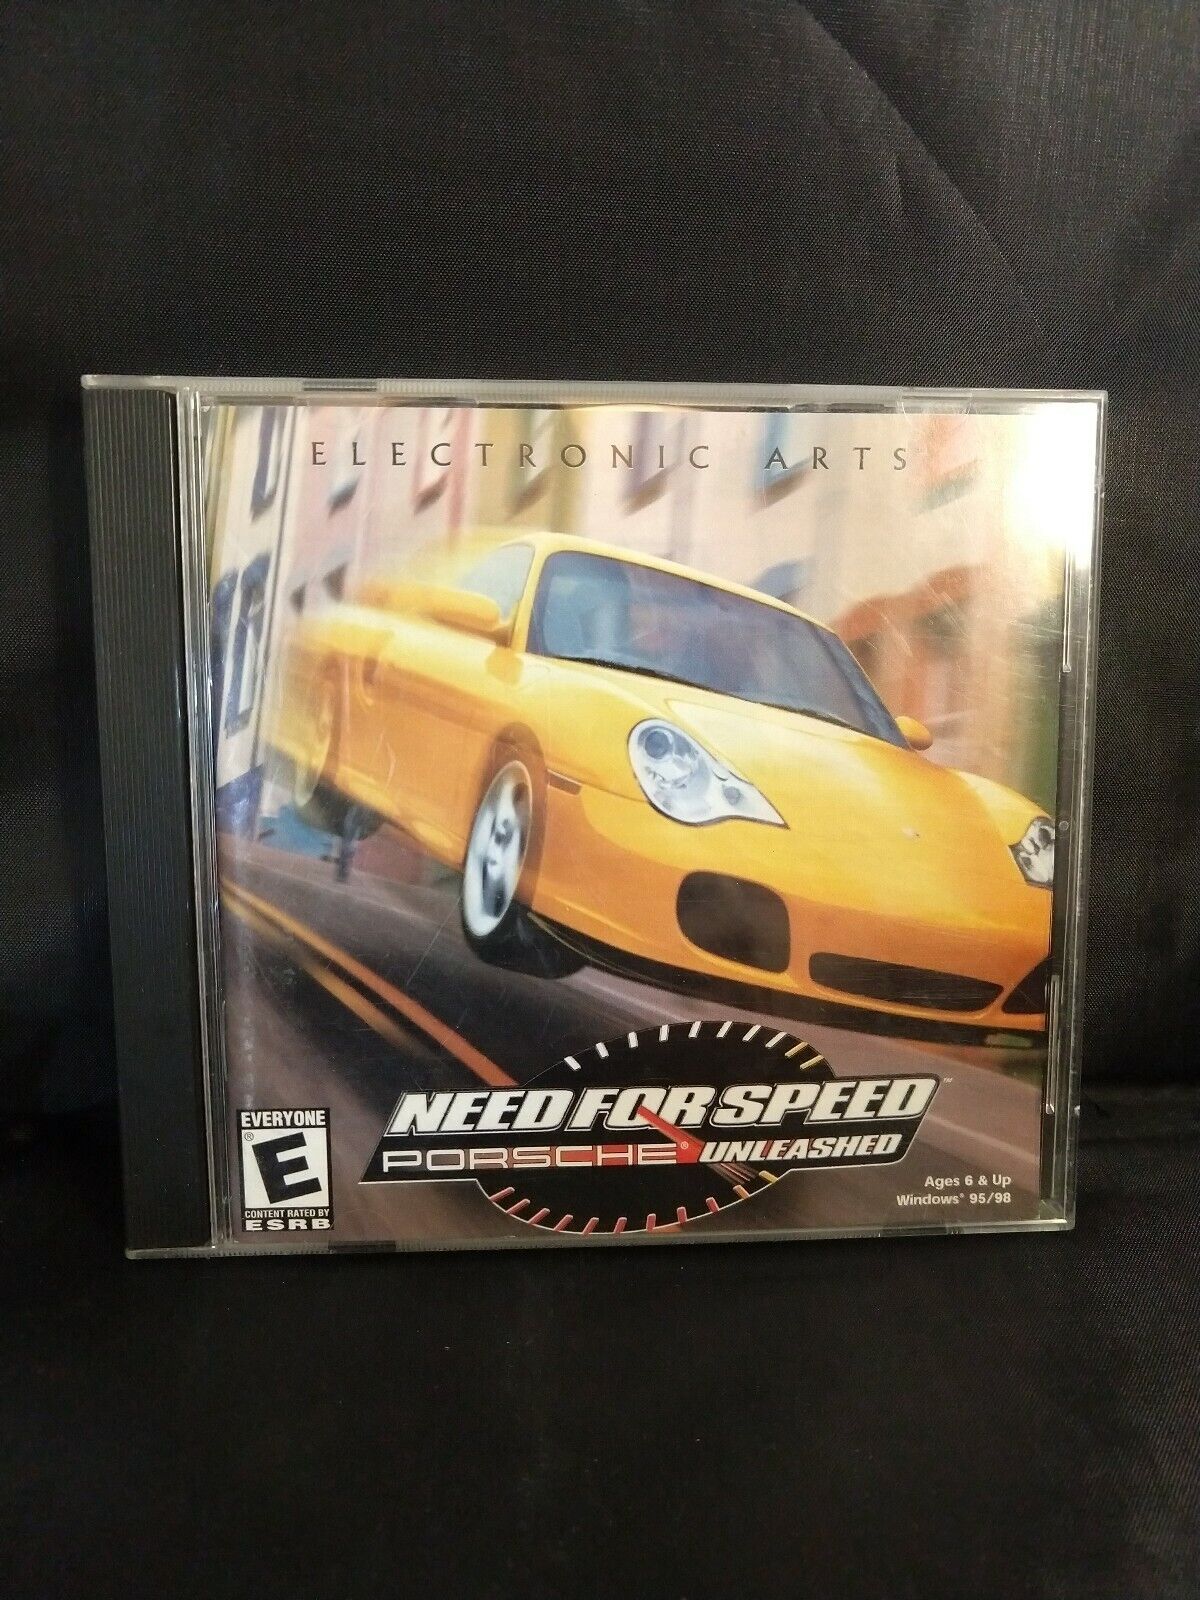 Need for Speed Porsche Unleashed. PC Game. 💿 CD Windows 95/98. Electronic Arts.